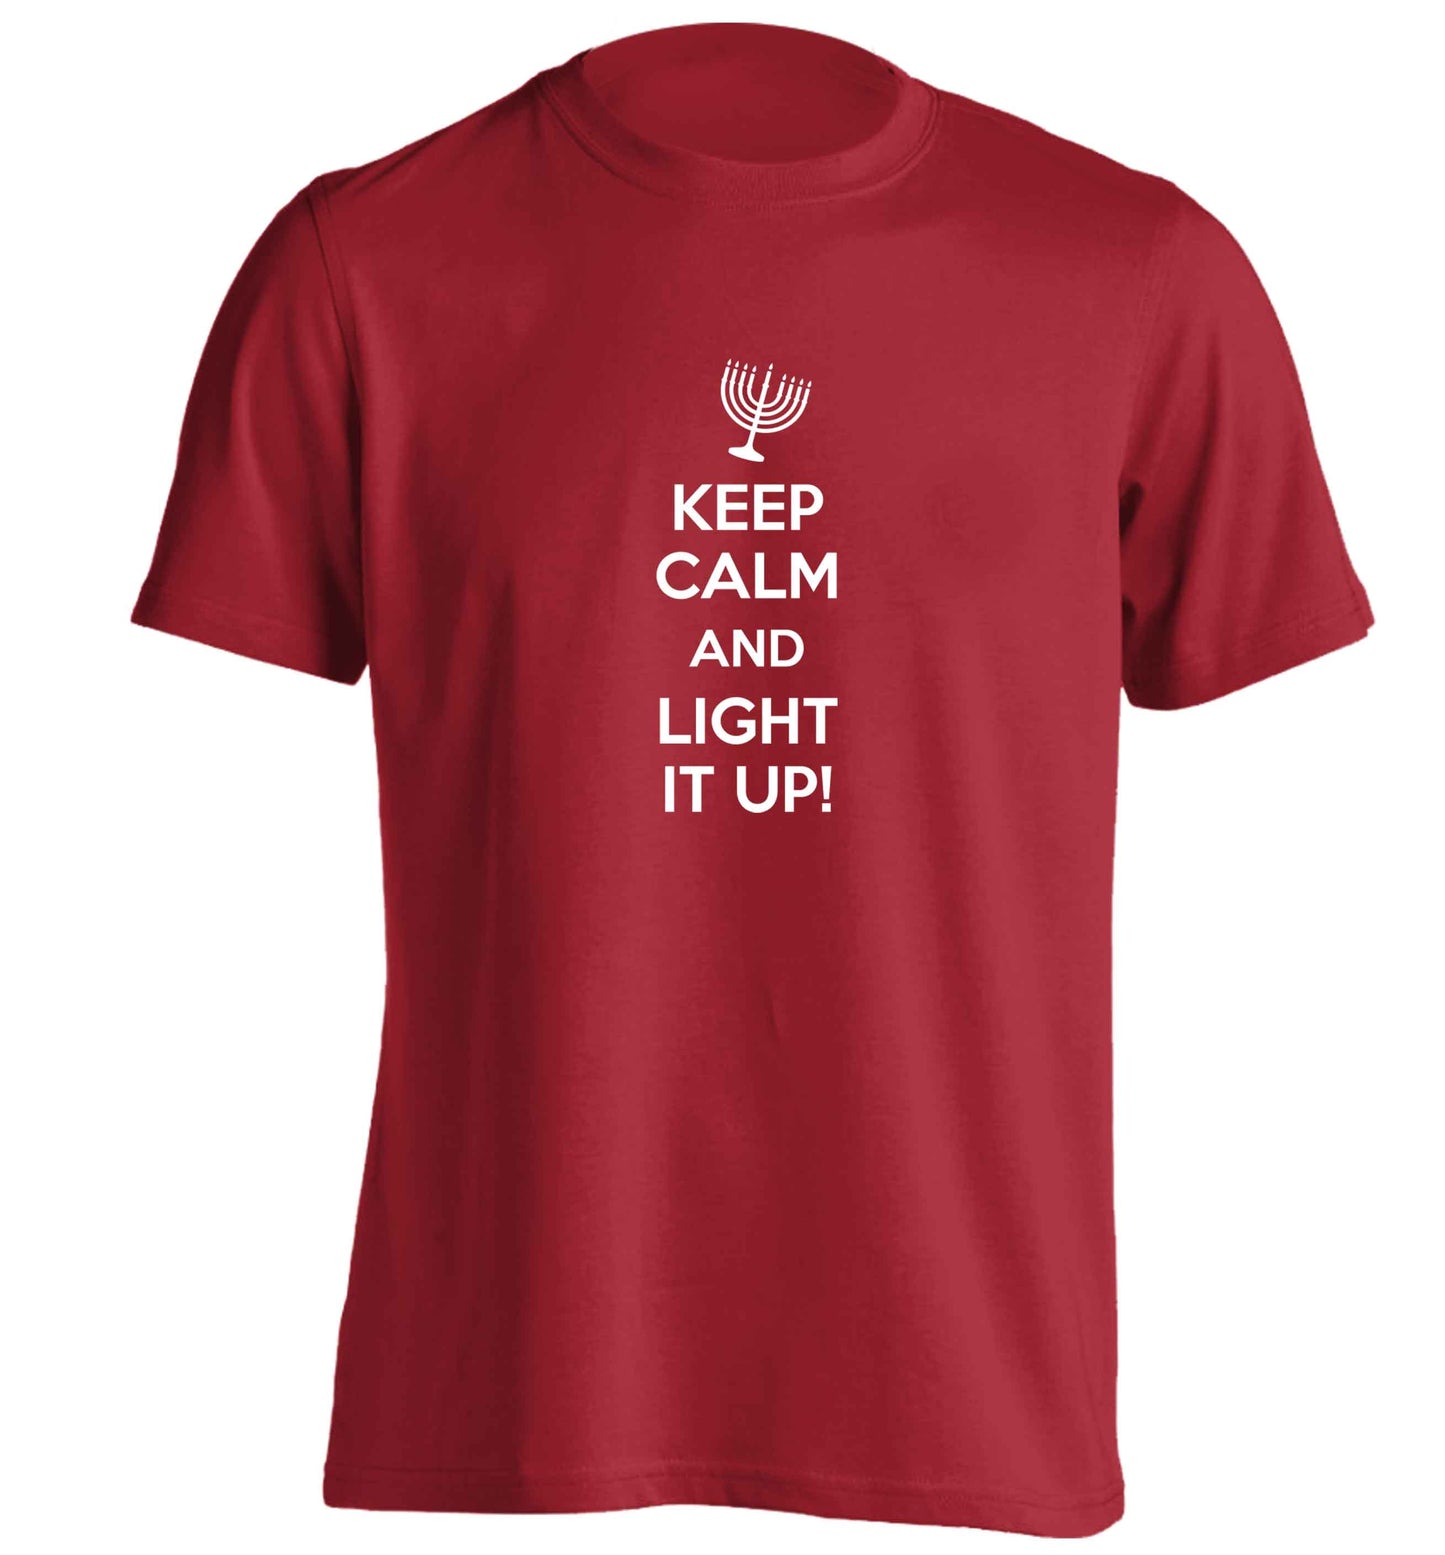 Keep calm and light it up adults unisex red Tshirt 2XL